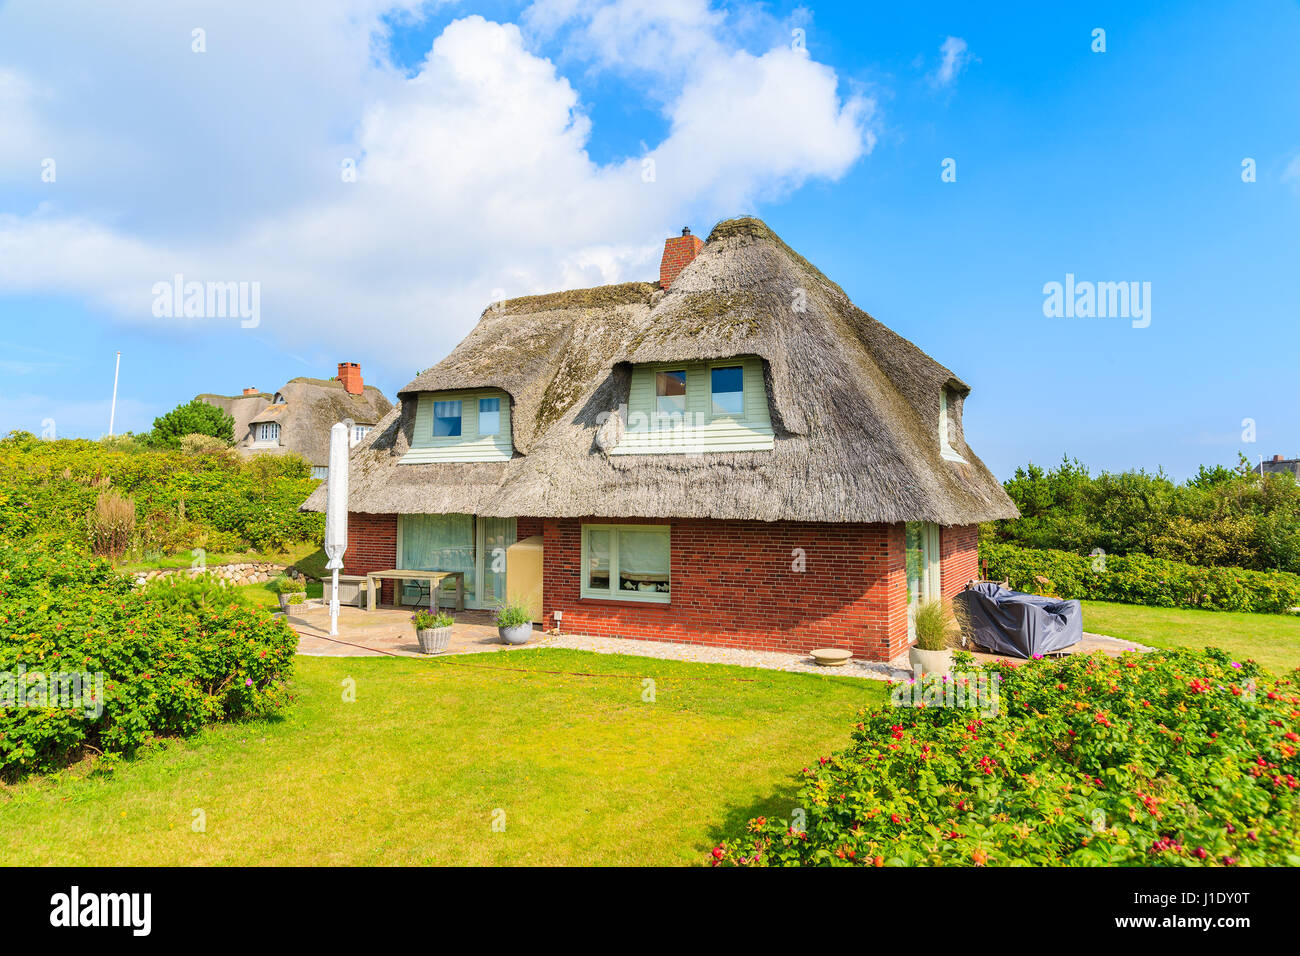 Typical red brick house in Westerheide village with straw roof, Sylt island, Germany Stock Photo